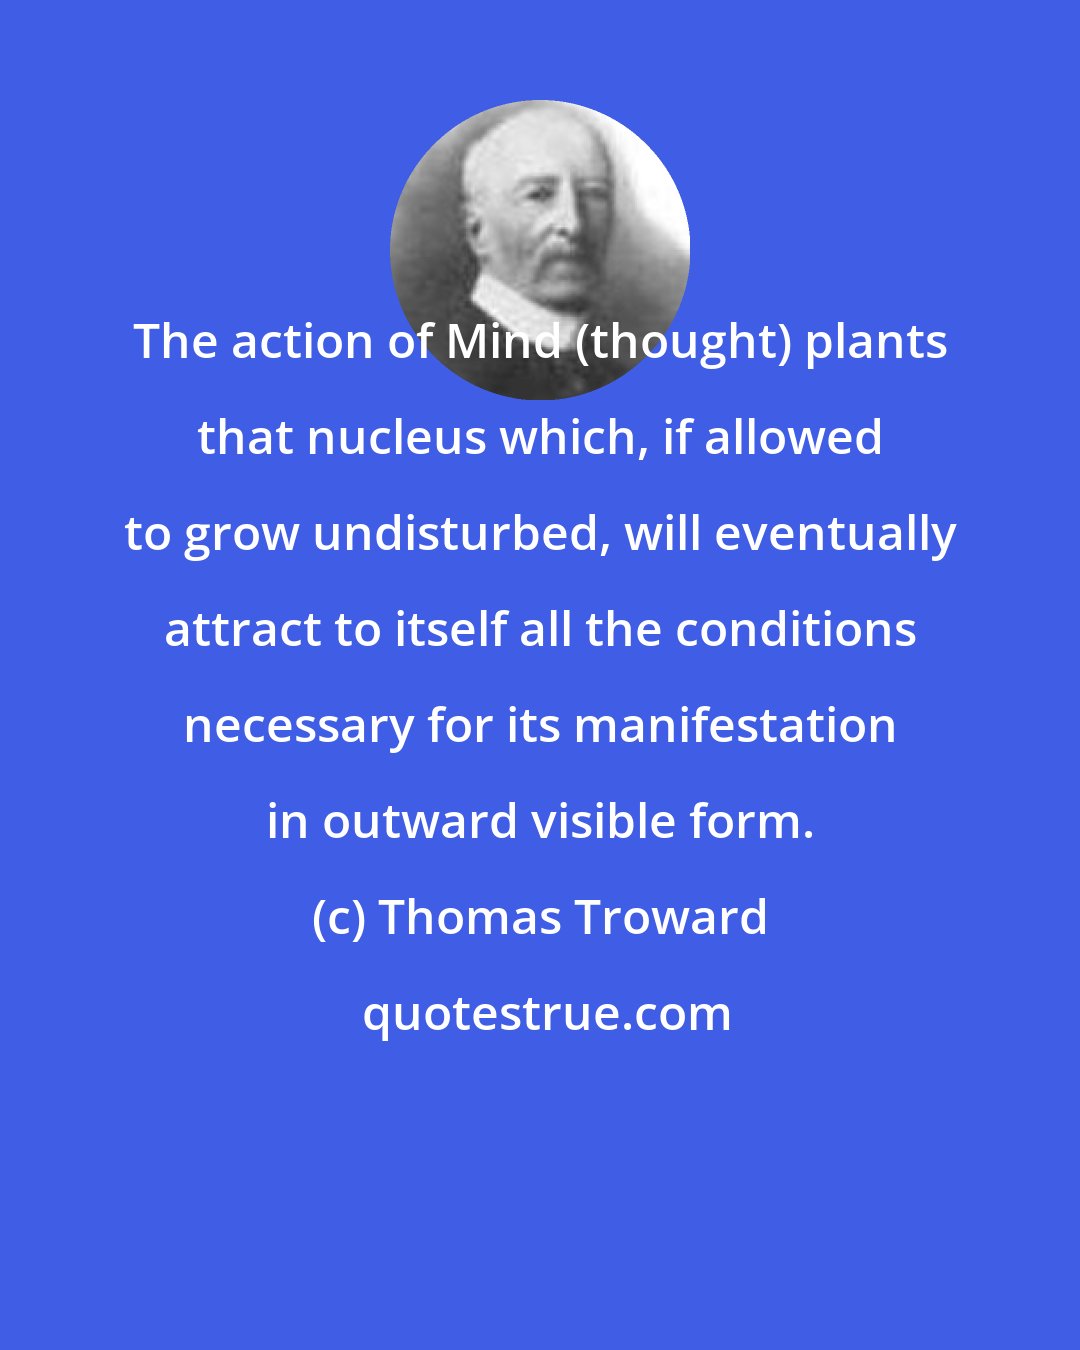 Thomas Troward: The action of Mind (thought) plants that nucleus which, if allowed to grow undisturbed, will eventually attract to itself all the conditions necessary for its manifestation in outward visible form.